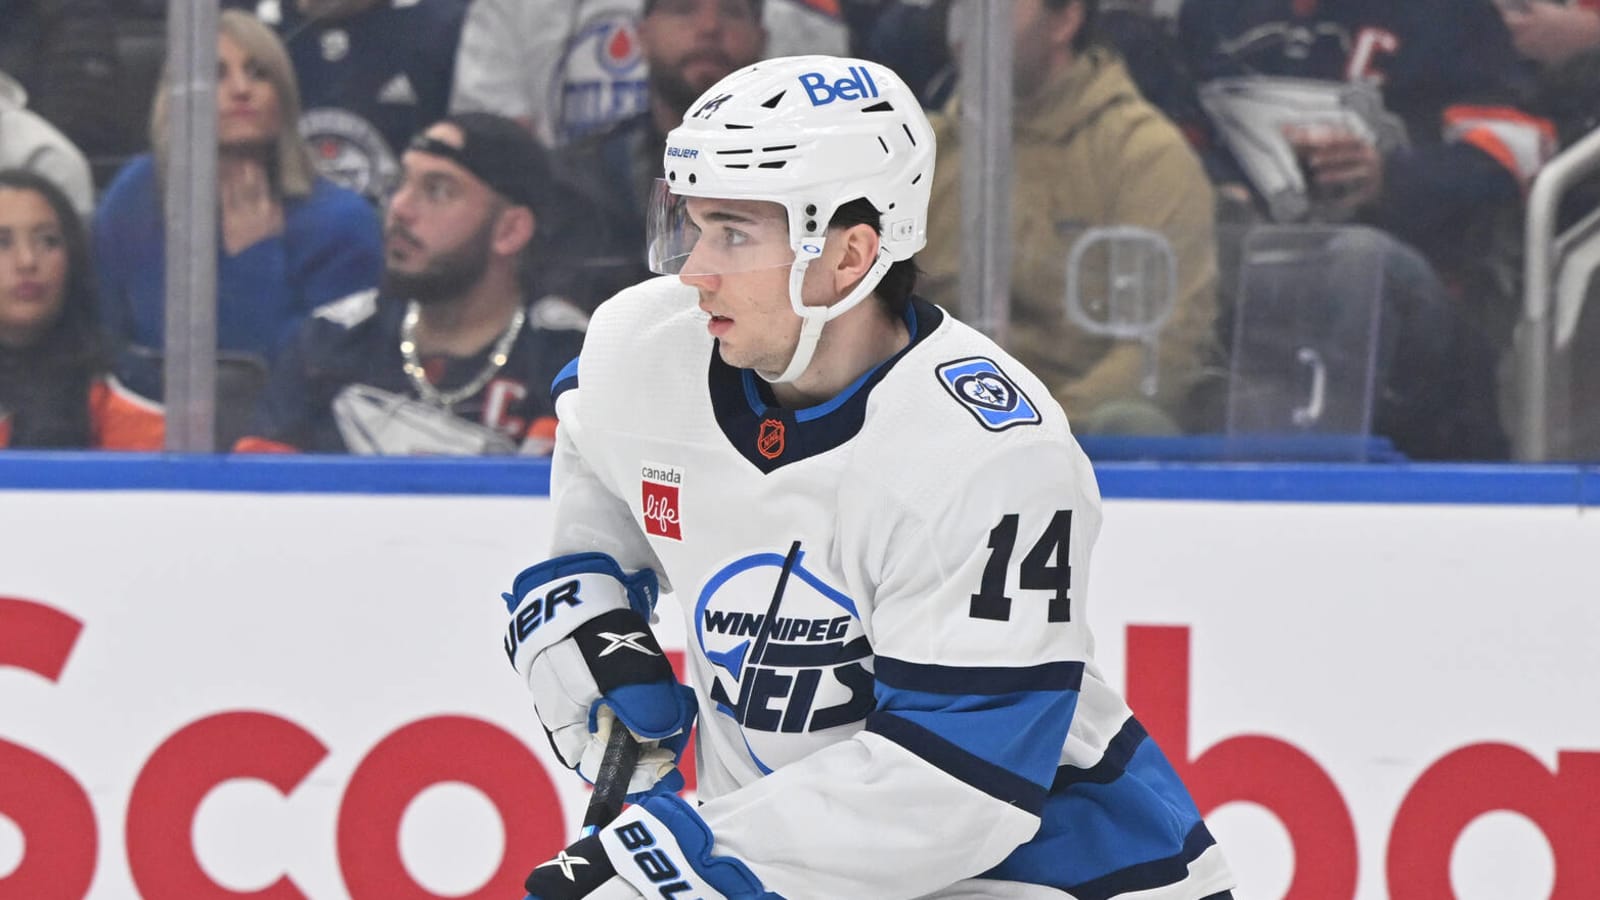 Winnipeg Jets defenseman to miss significant time with injury